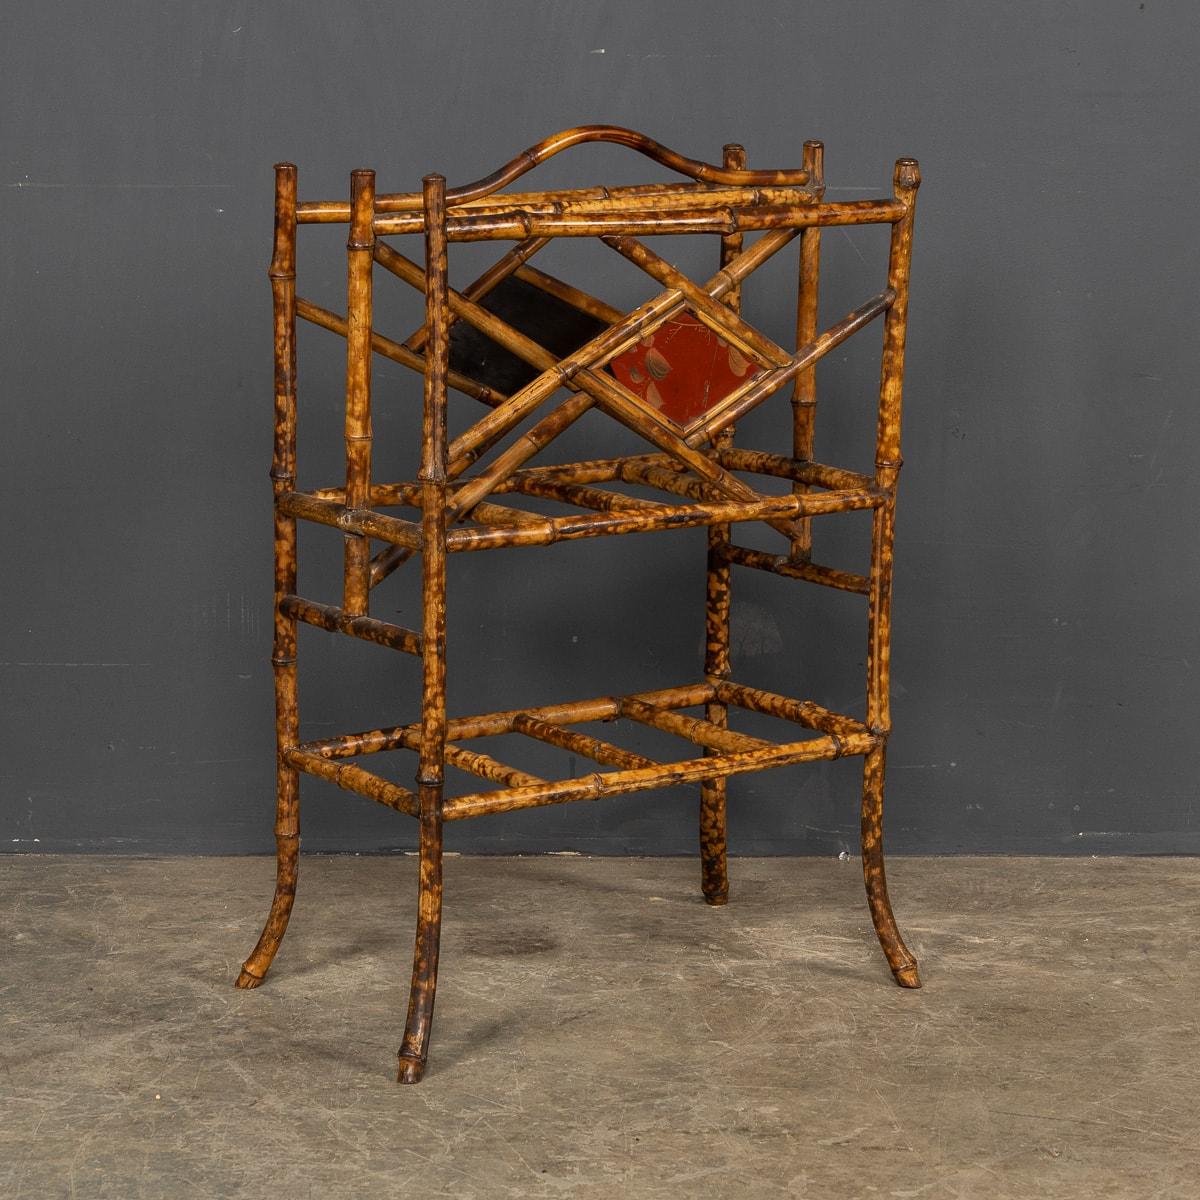 A beautiful early 20th century very stylish bamboo magazine rack with a Japanesque lacquered finish.

CONDITION
In Good Condition. (please refer to photographs)

Size
Height: 70cm
Width: 46cm
Depth: 26cm.